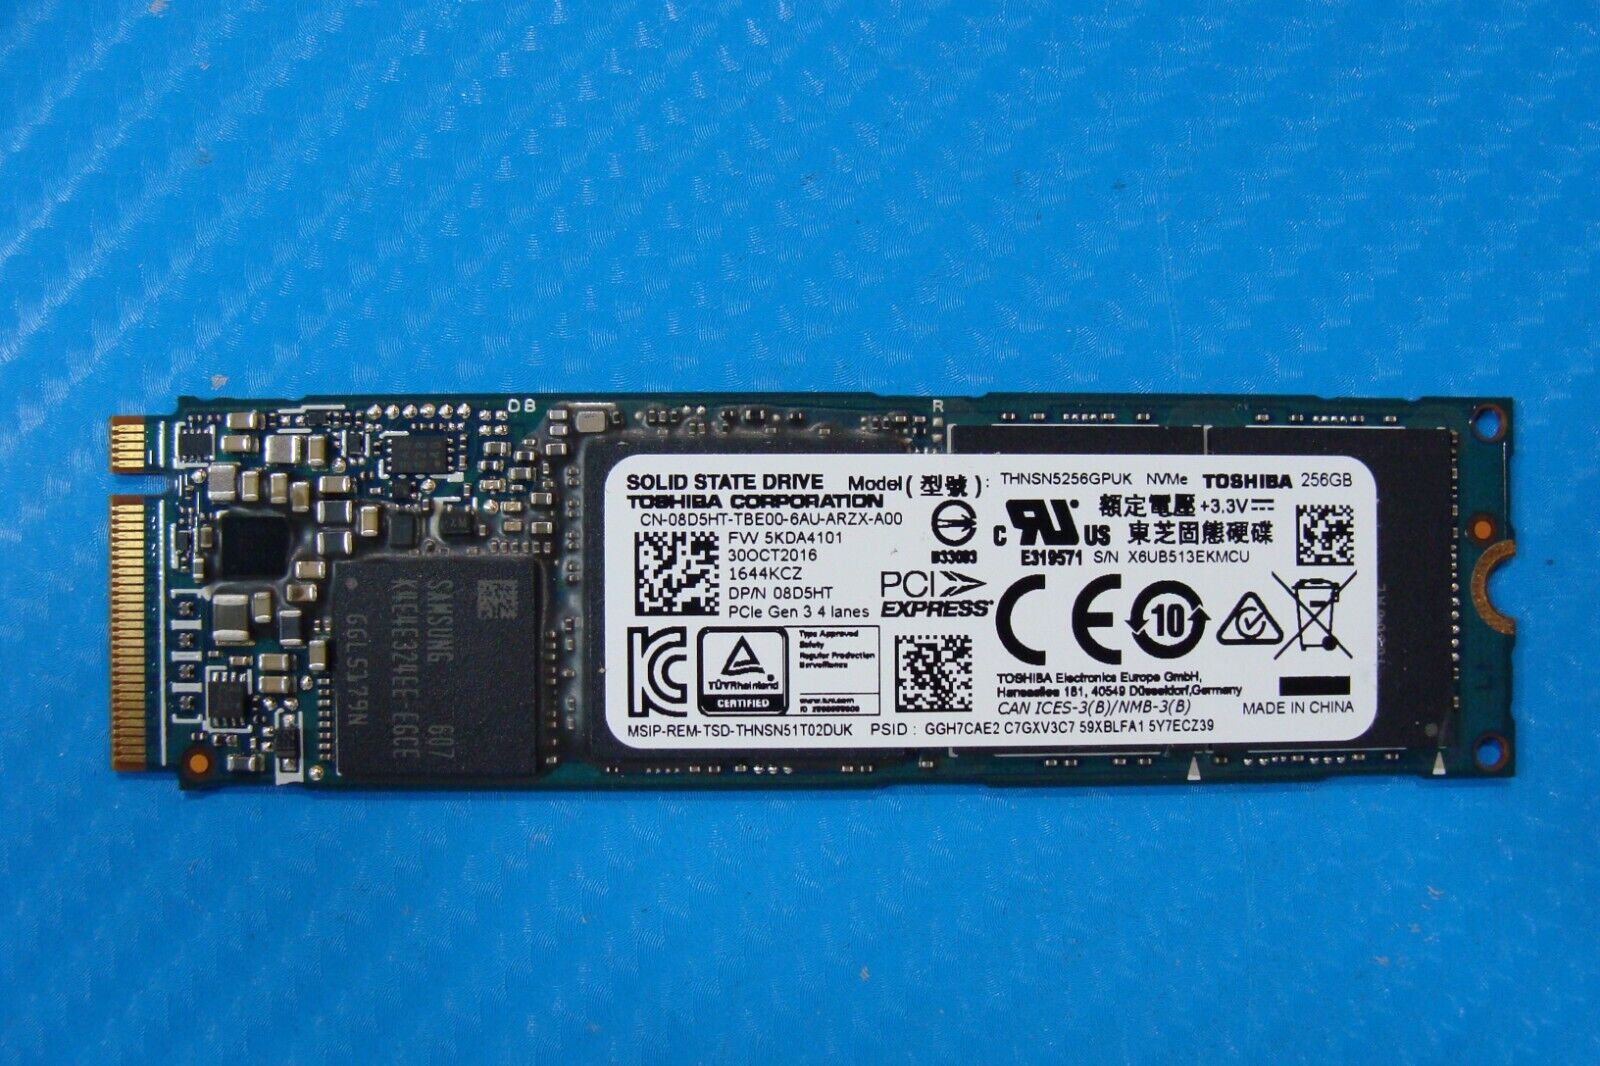 Dell 13 9350 Toshiba 256GB NVMe M.2 SSD Solid State Drive 8D5HT THNSN5256GPUK